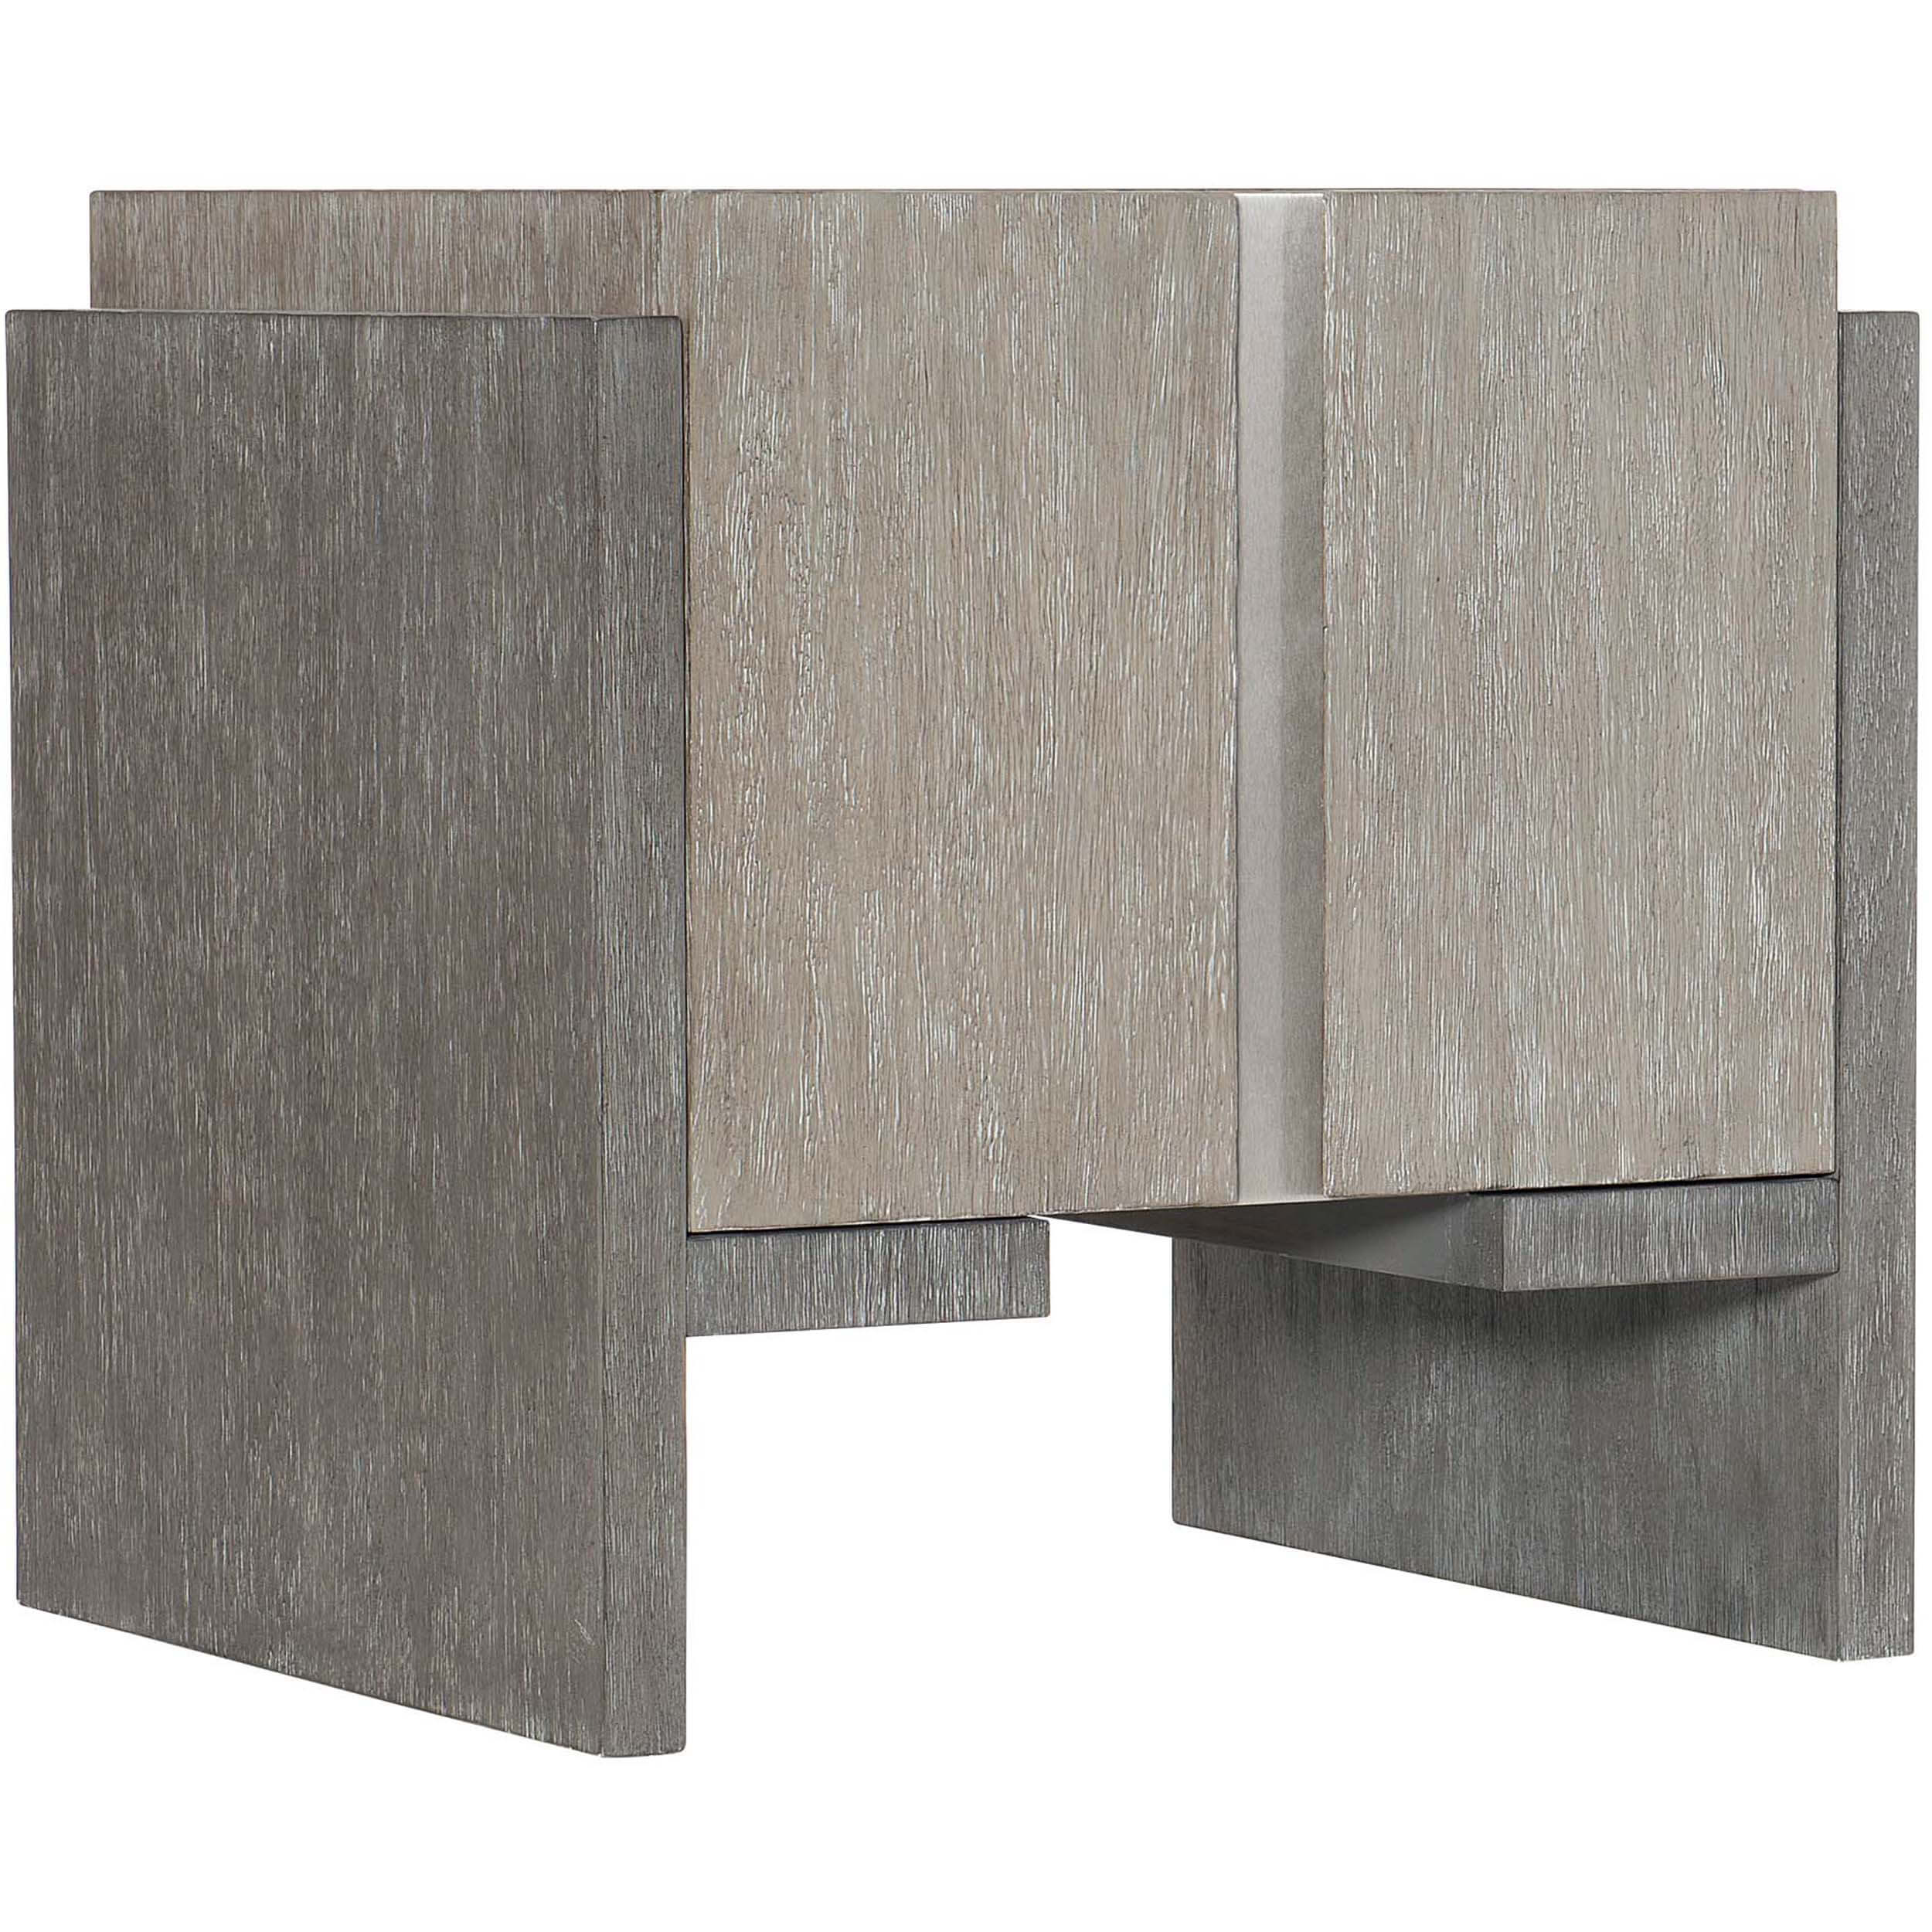 Image of Foundations Side Table, Light Shale